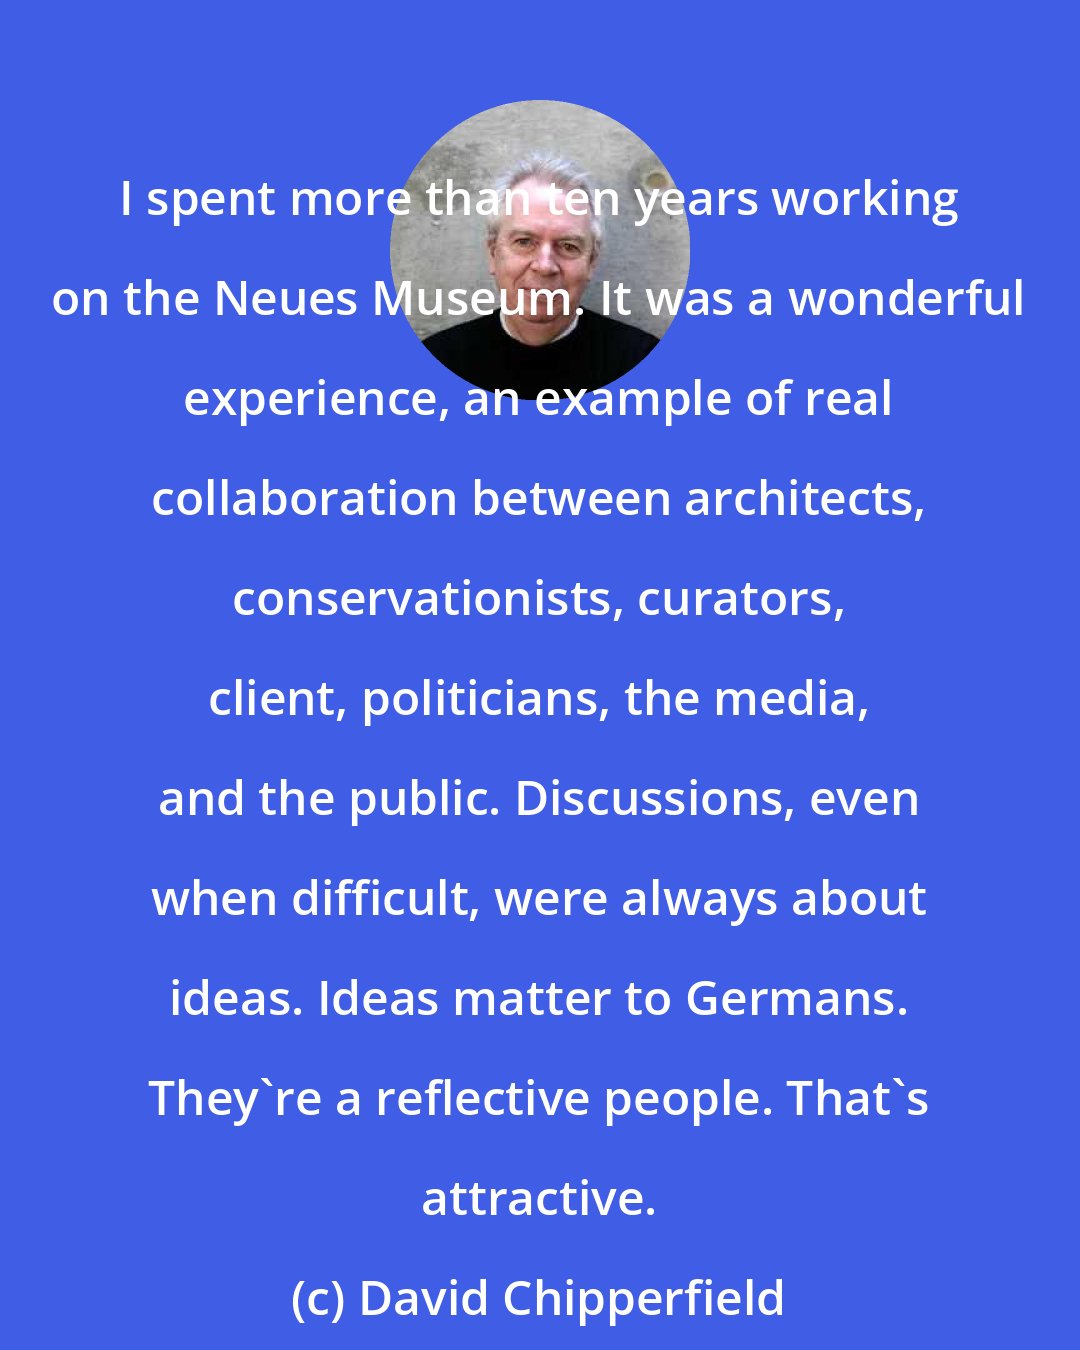 David Chipperfield: I spent more than ten years working on the Neues Museum. It was a wonderful experience, an example of real collaboration between architects, conservationists, curators, client, politicians, the media, and the public. Discussions, even when difficult, were always about ideas. Ideas matter to Germans. They're a reflective people. That's attractive.